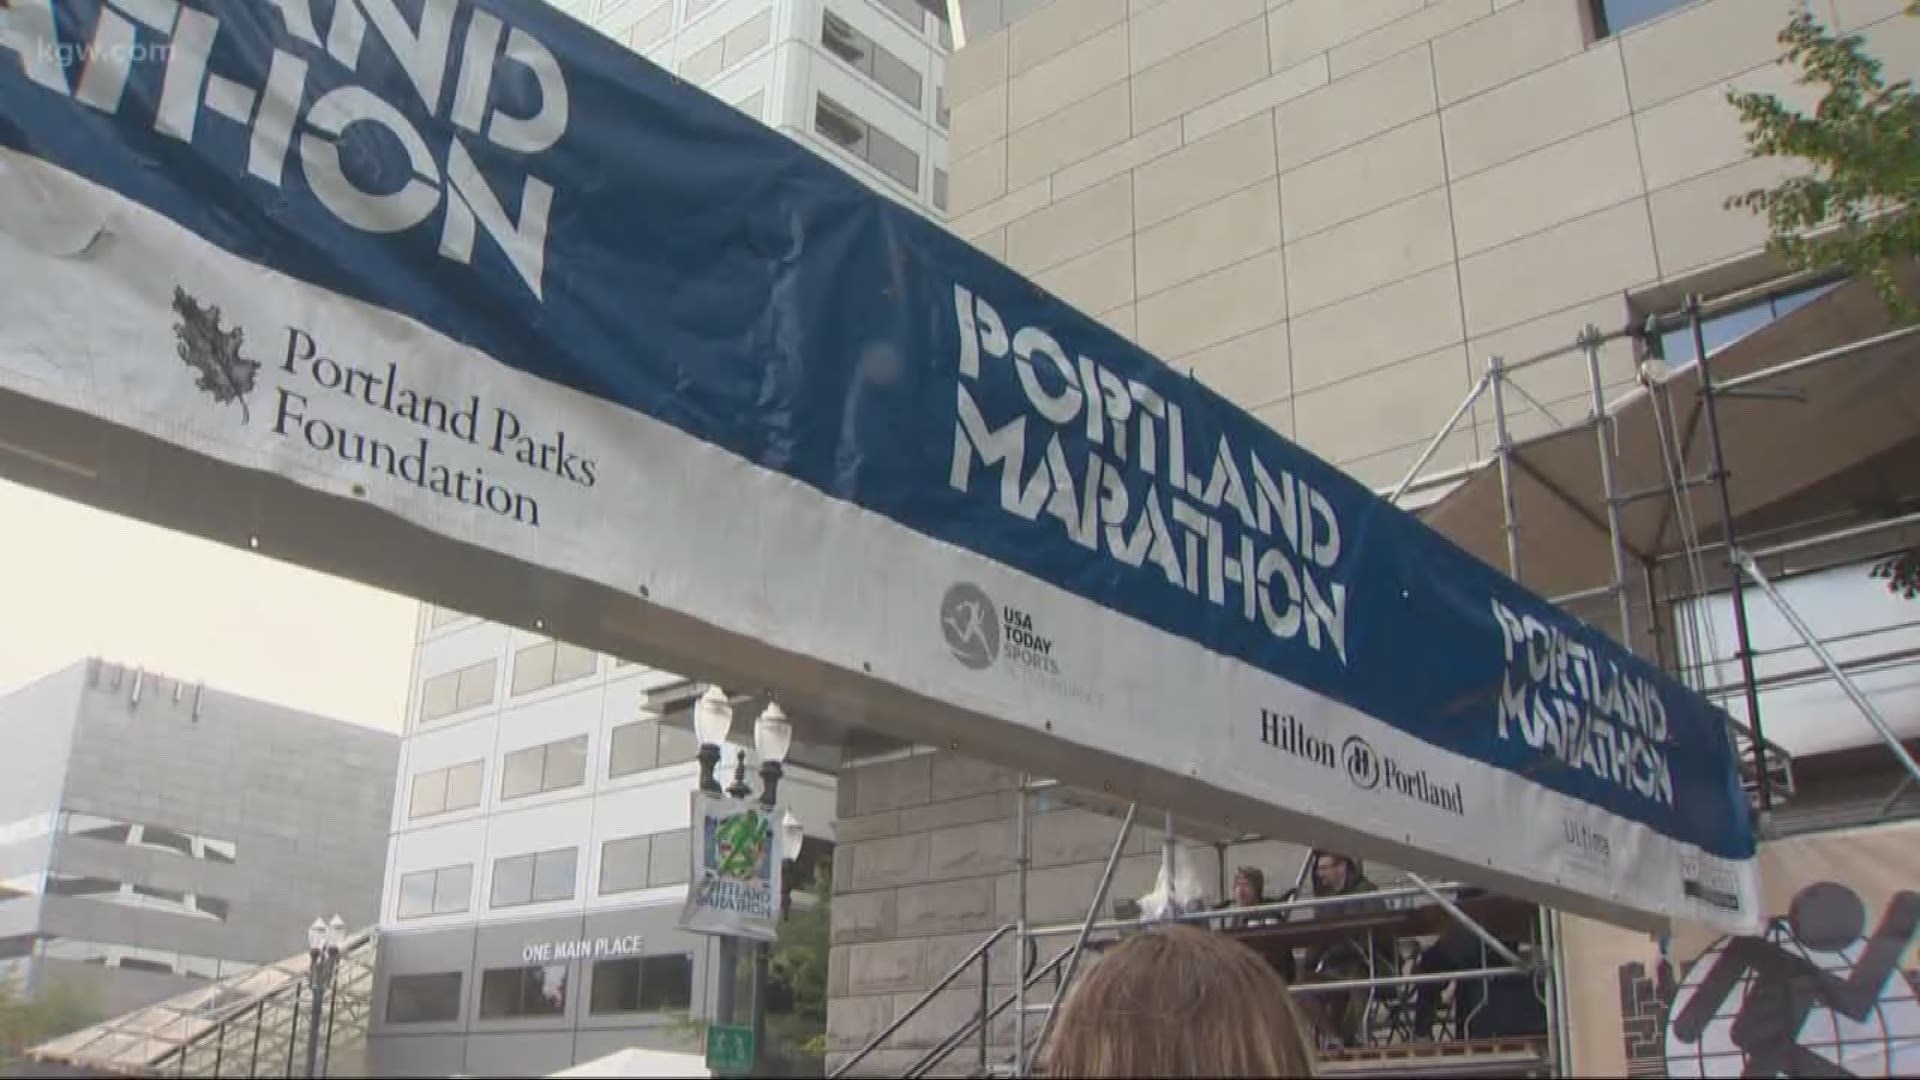 The former Portland Marathon director must pay $865,000 as part of a settlement.